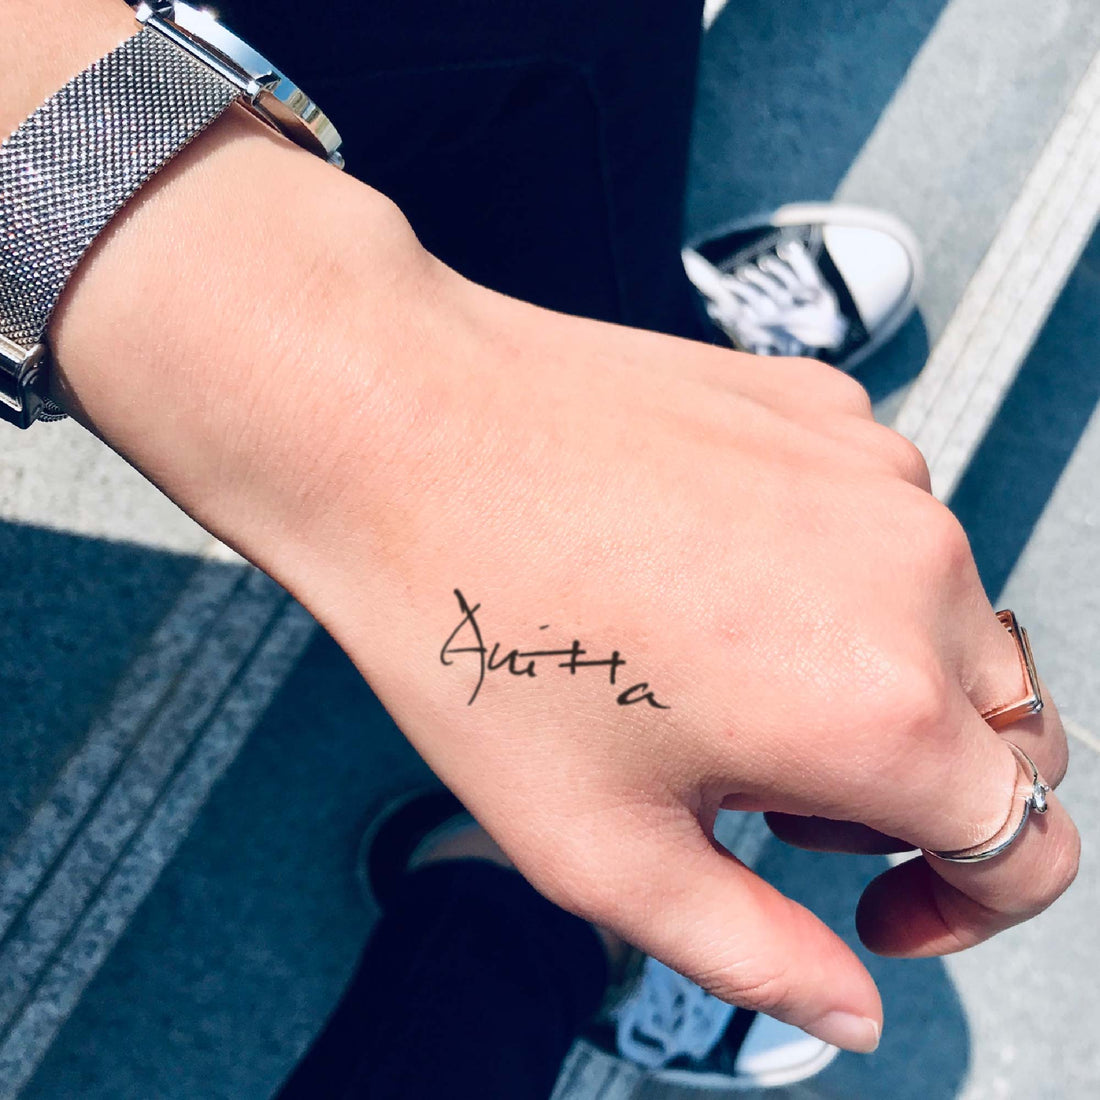 Anitta custom temporary tattoo sticker design idea inspiration meanings removal arm wrist hand words font name signature calligraphy lyrics tour concert outfits merch accessory gift souvenir costumes wear dress up code